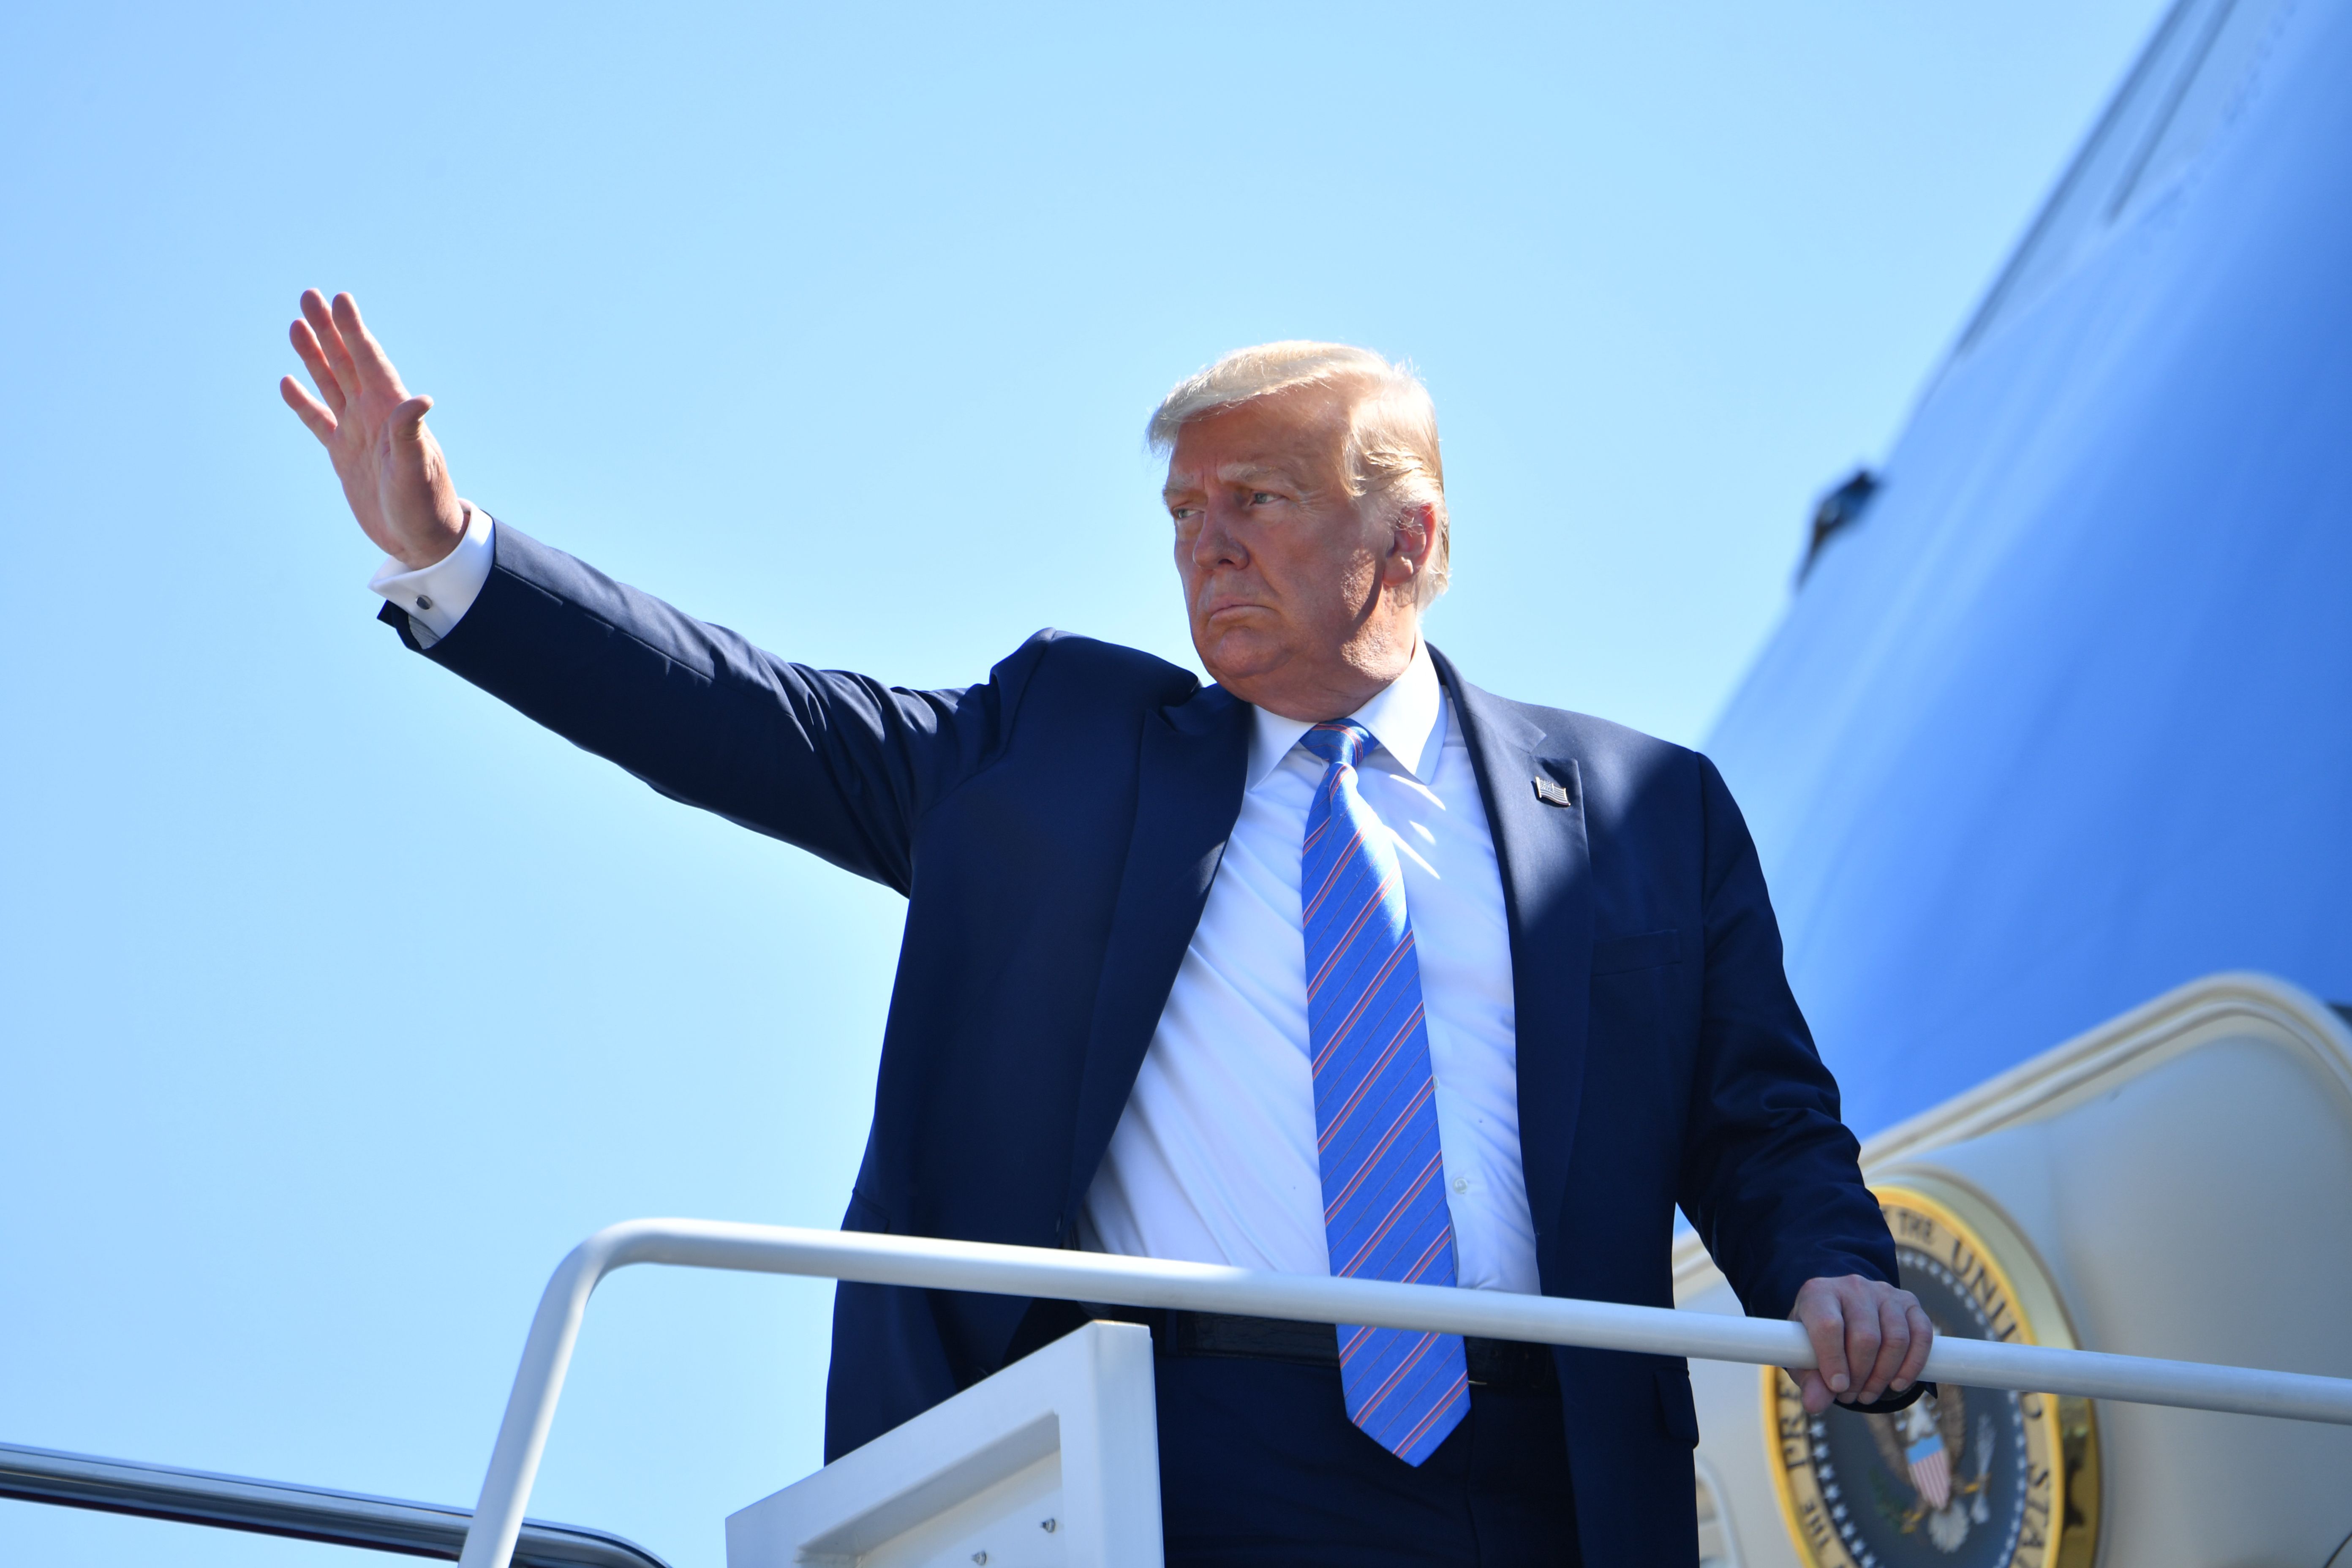 US President Donald Trump waves as he boards Air Force One on July 29, 2020 at Andrews Air Force Base, Maryland en route to Texas. (Photo by NICHOLAS KAMM/AFP via Getty Images)